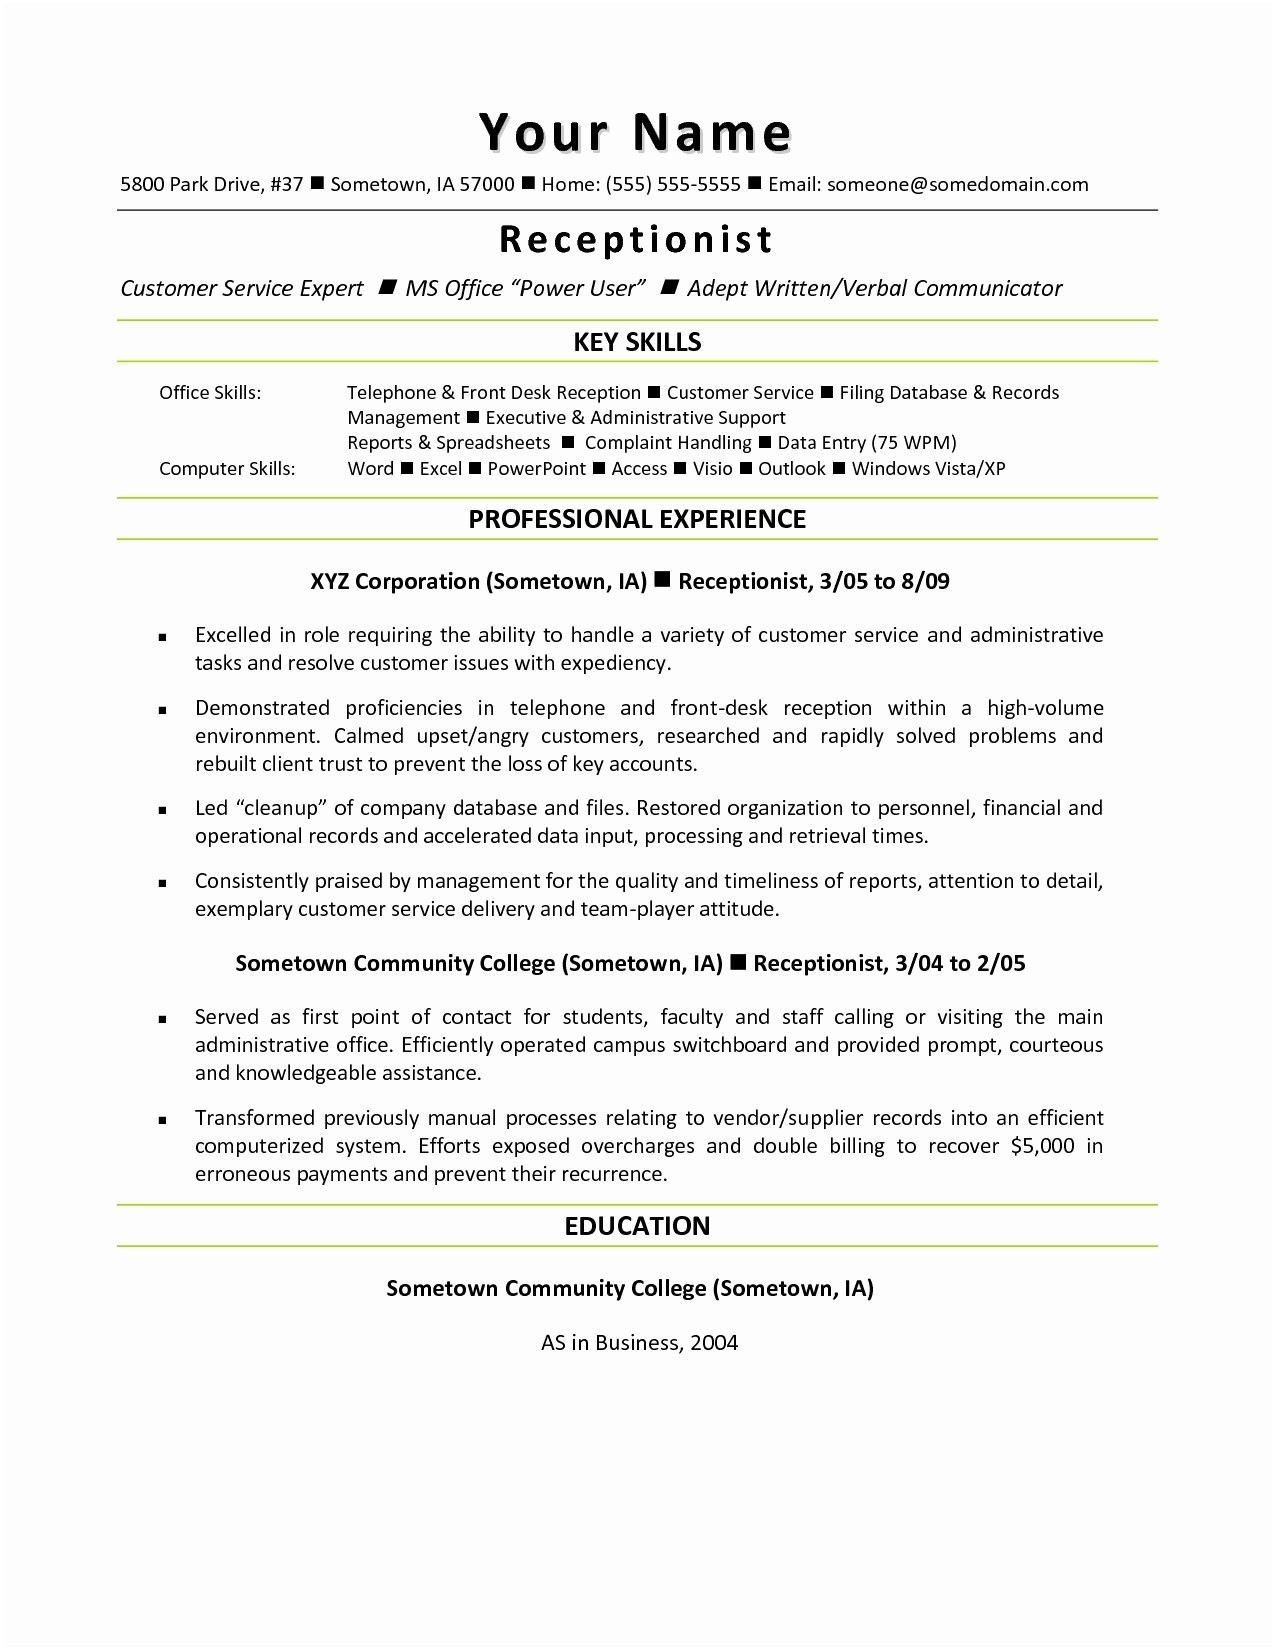 Microsoft Word Cover Letter Template - Resume Microsoft Word Fresh Resume Mail format Sample Fresh